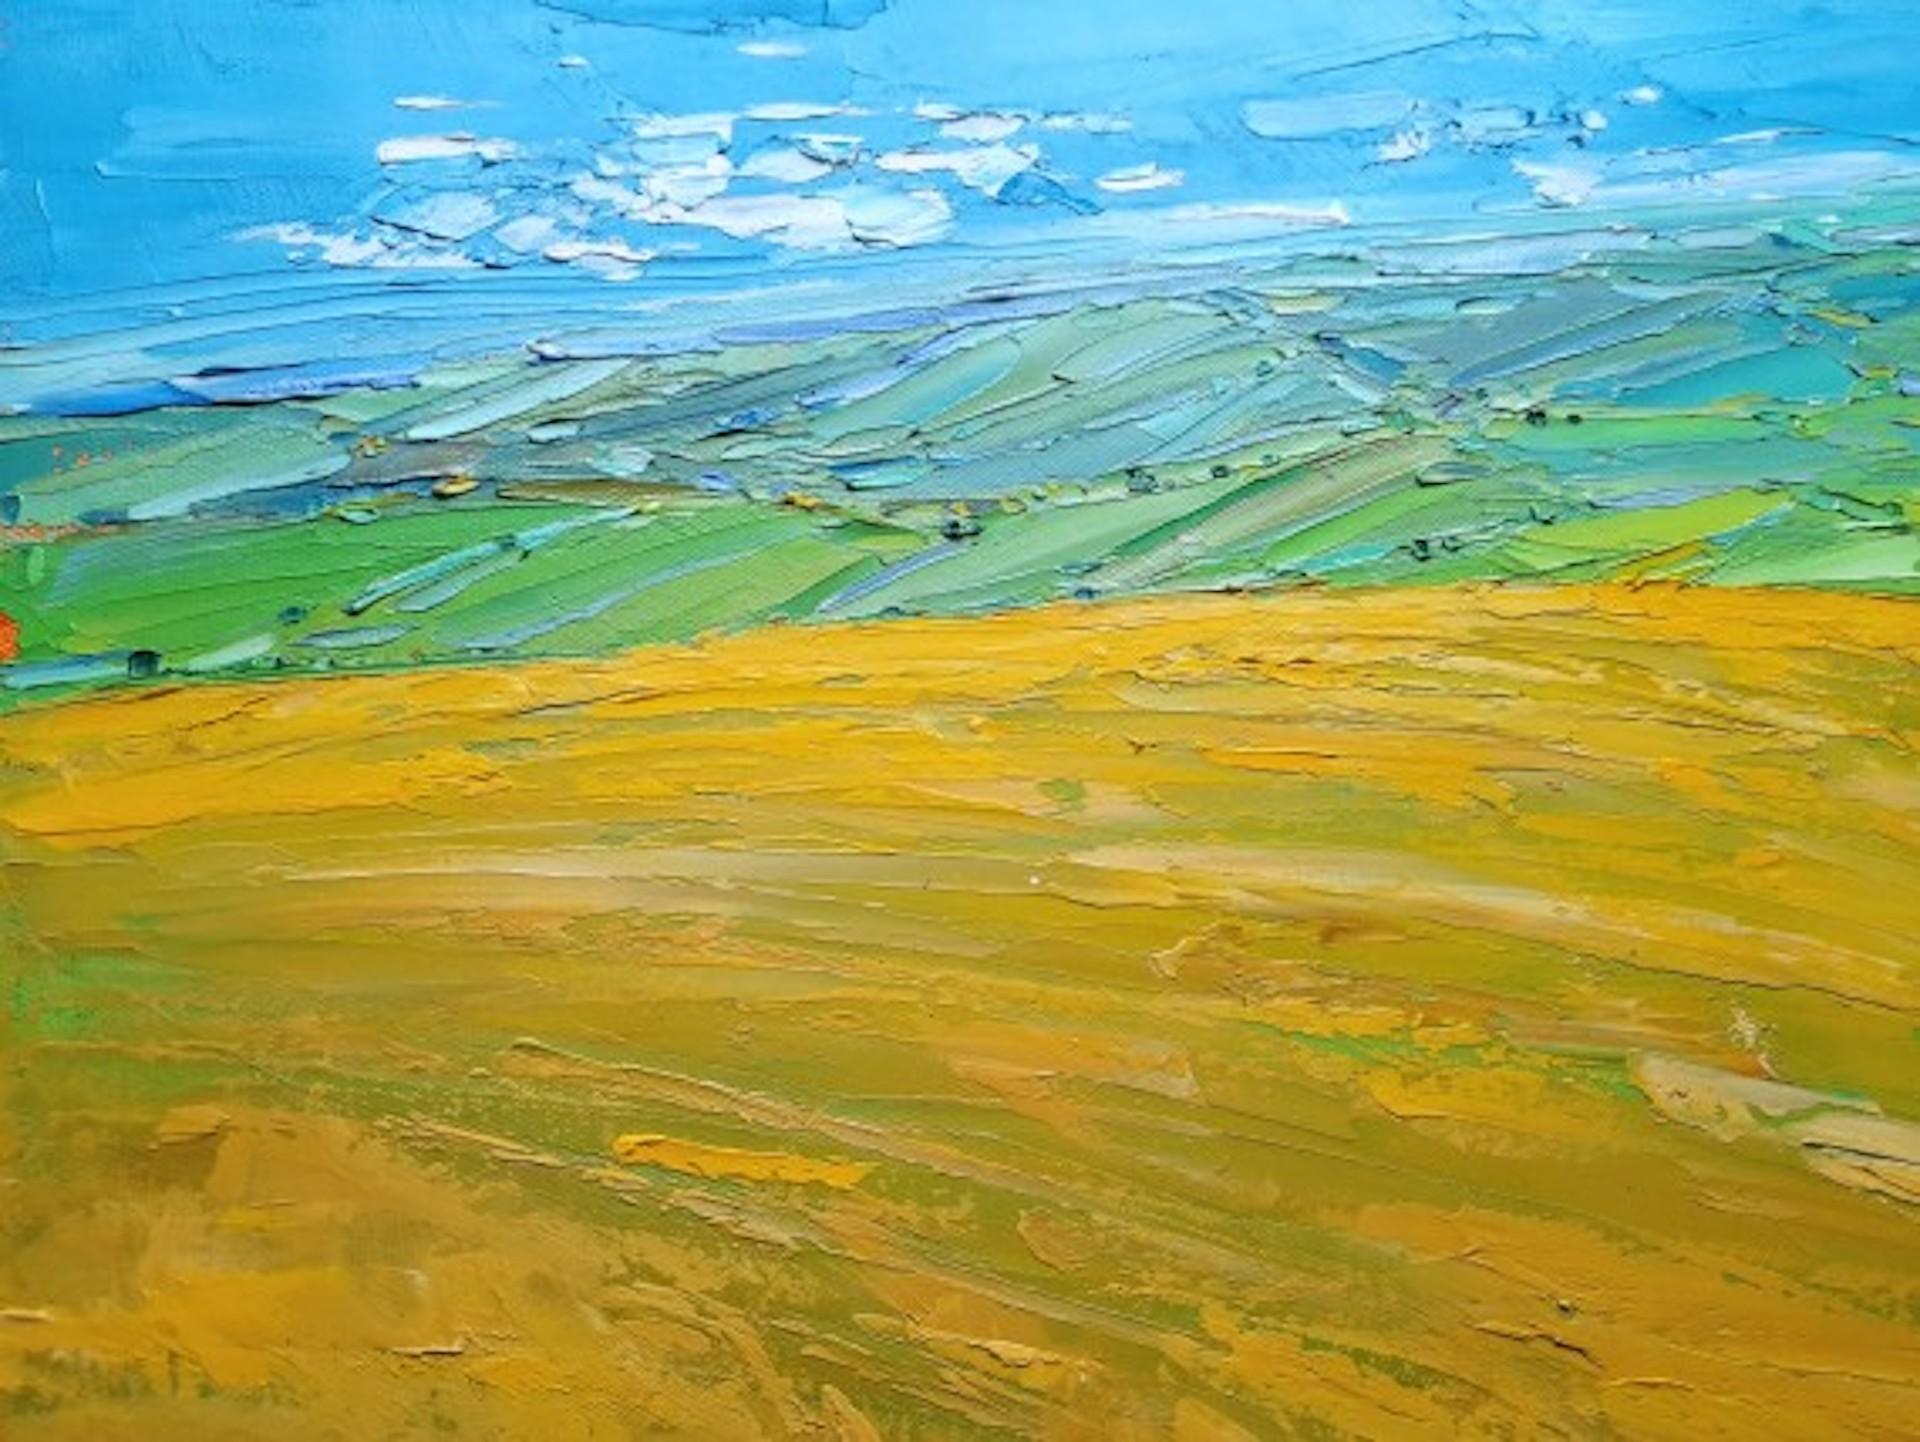 Barley Field View by Georgie Dowling [2021]

original
Oil paint on canvas
Image size: H:40 cm x W:50 cm
Complete Size of Unframed Work: H:40 cm x W:50 cm x D:2cm
Sold Unframed
Please note that insitu images are purely an indication of how a piece